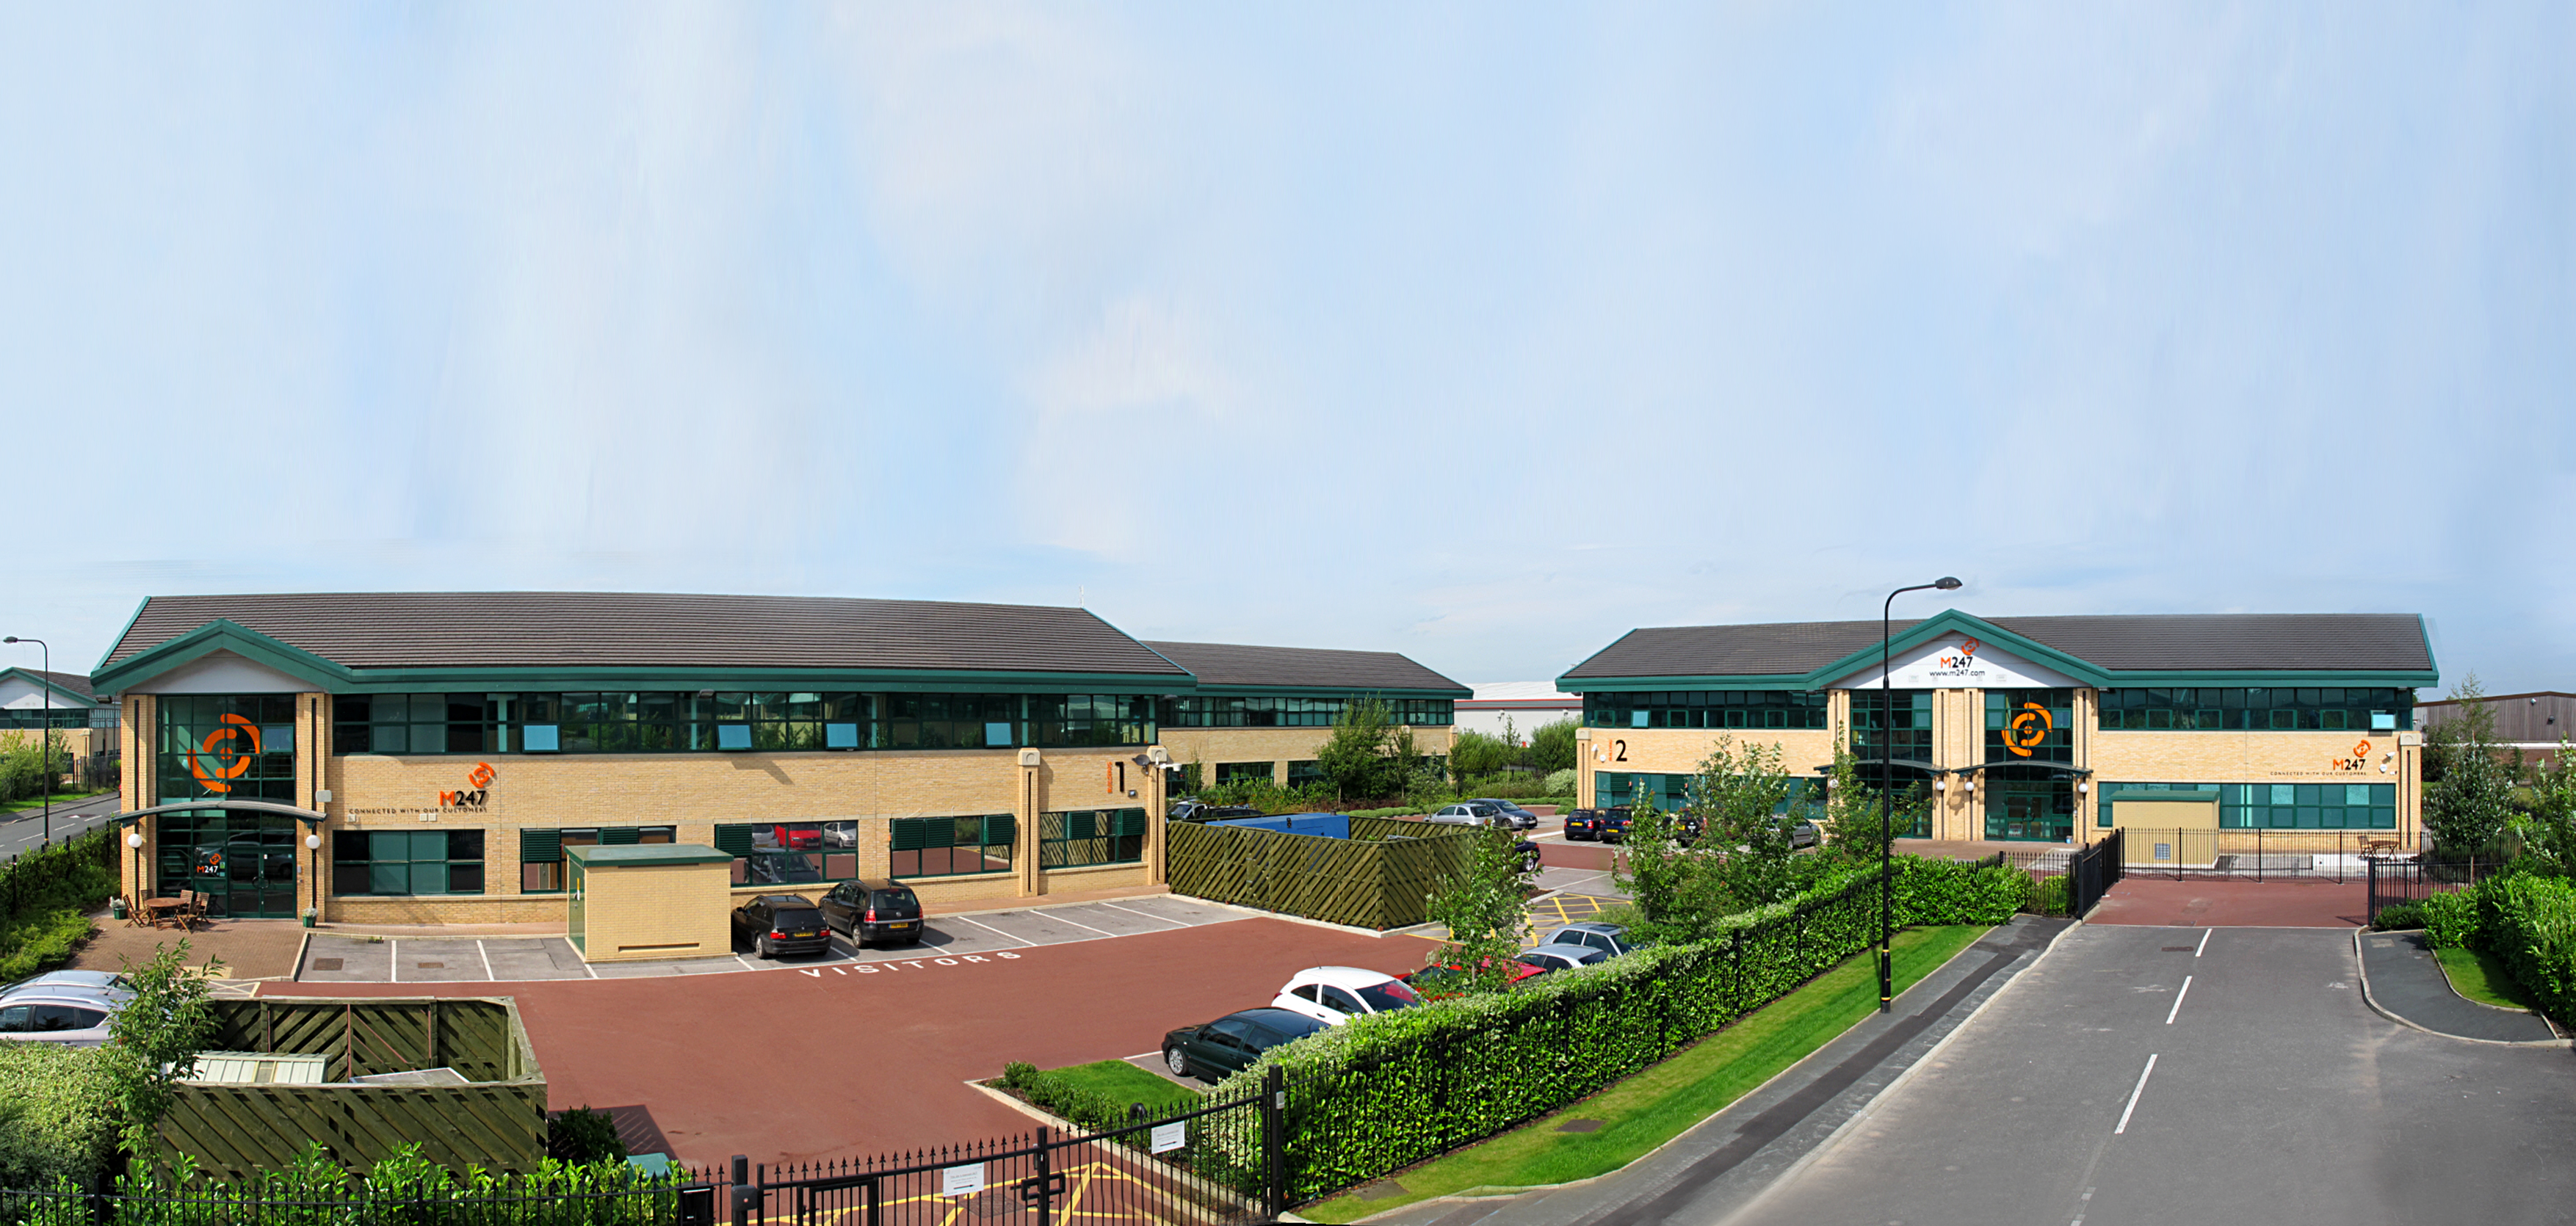 M247 Head Office Campus at Trafford Park, Manchester